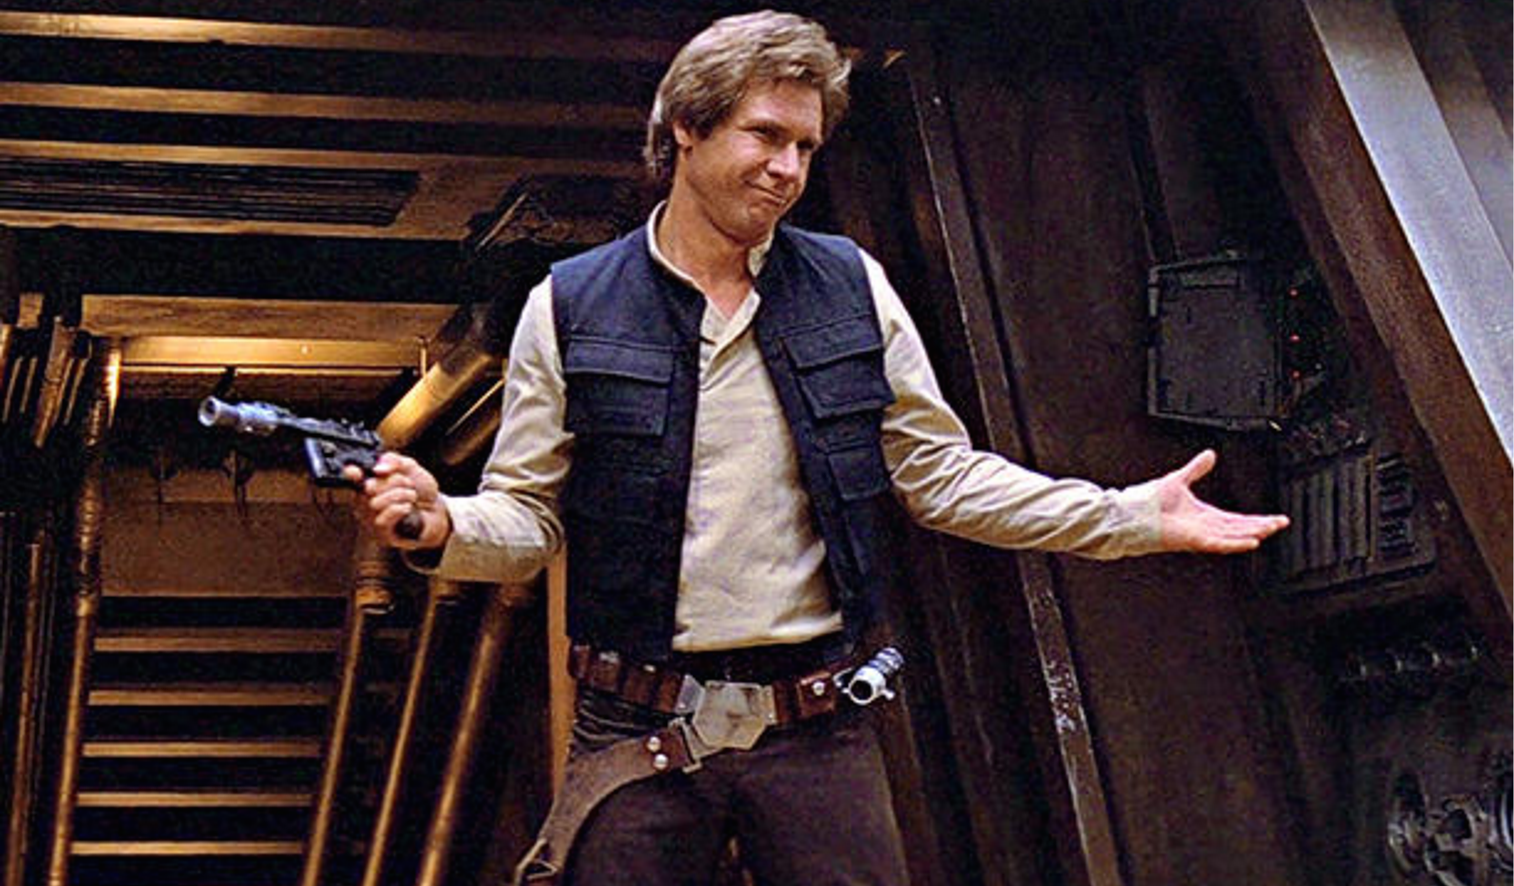 Han solo casting rumors for ‘star wars’ spinoff